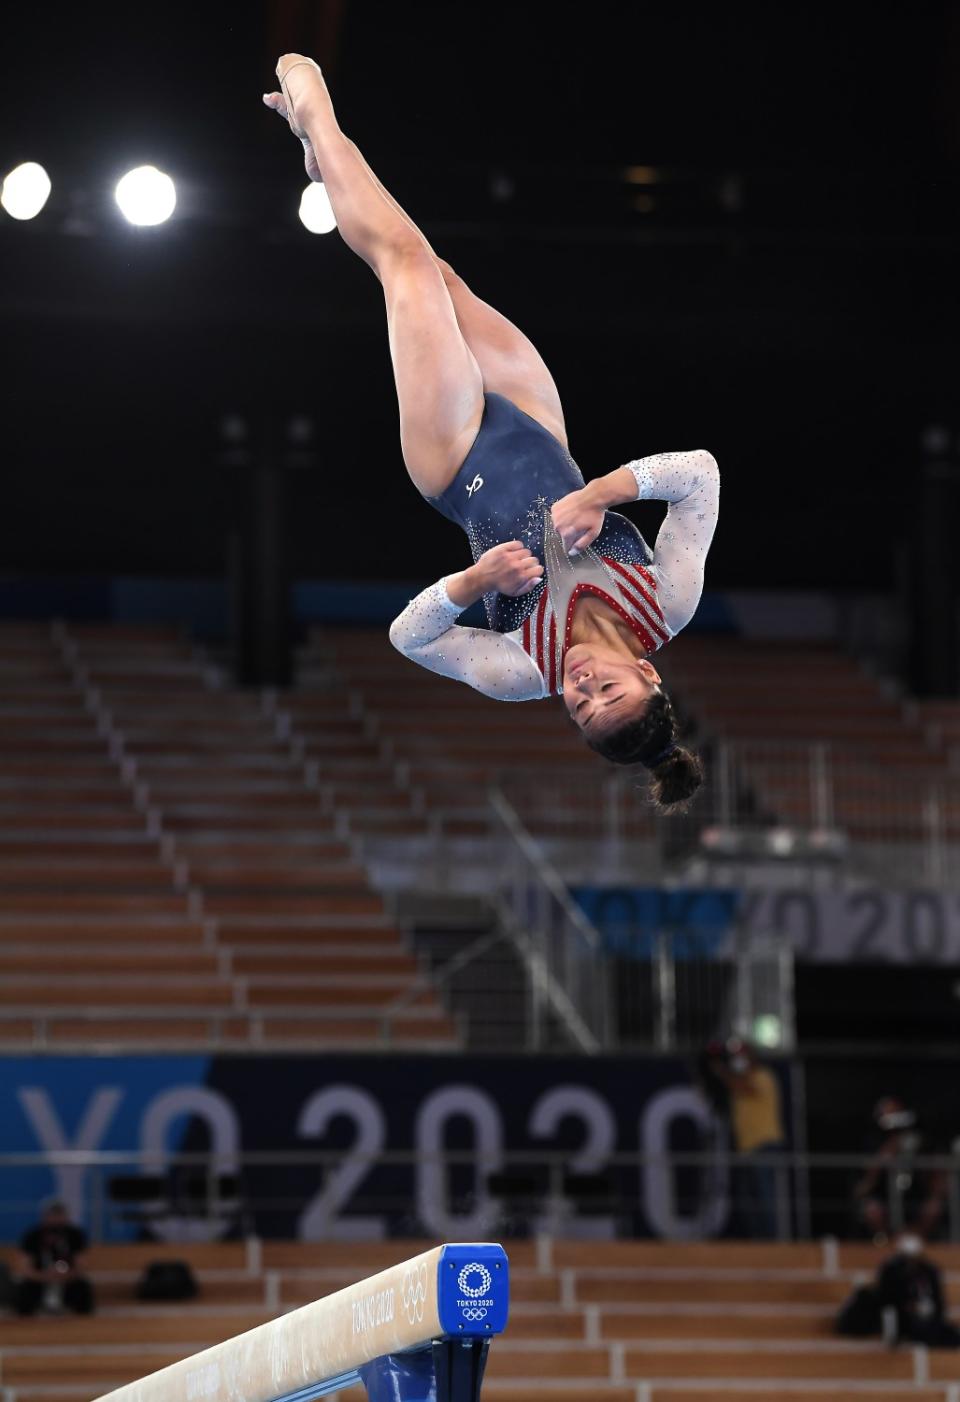 Suni Lee competes in women's gymnastics at the Tokyo Olympics.